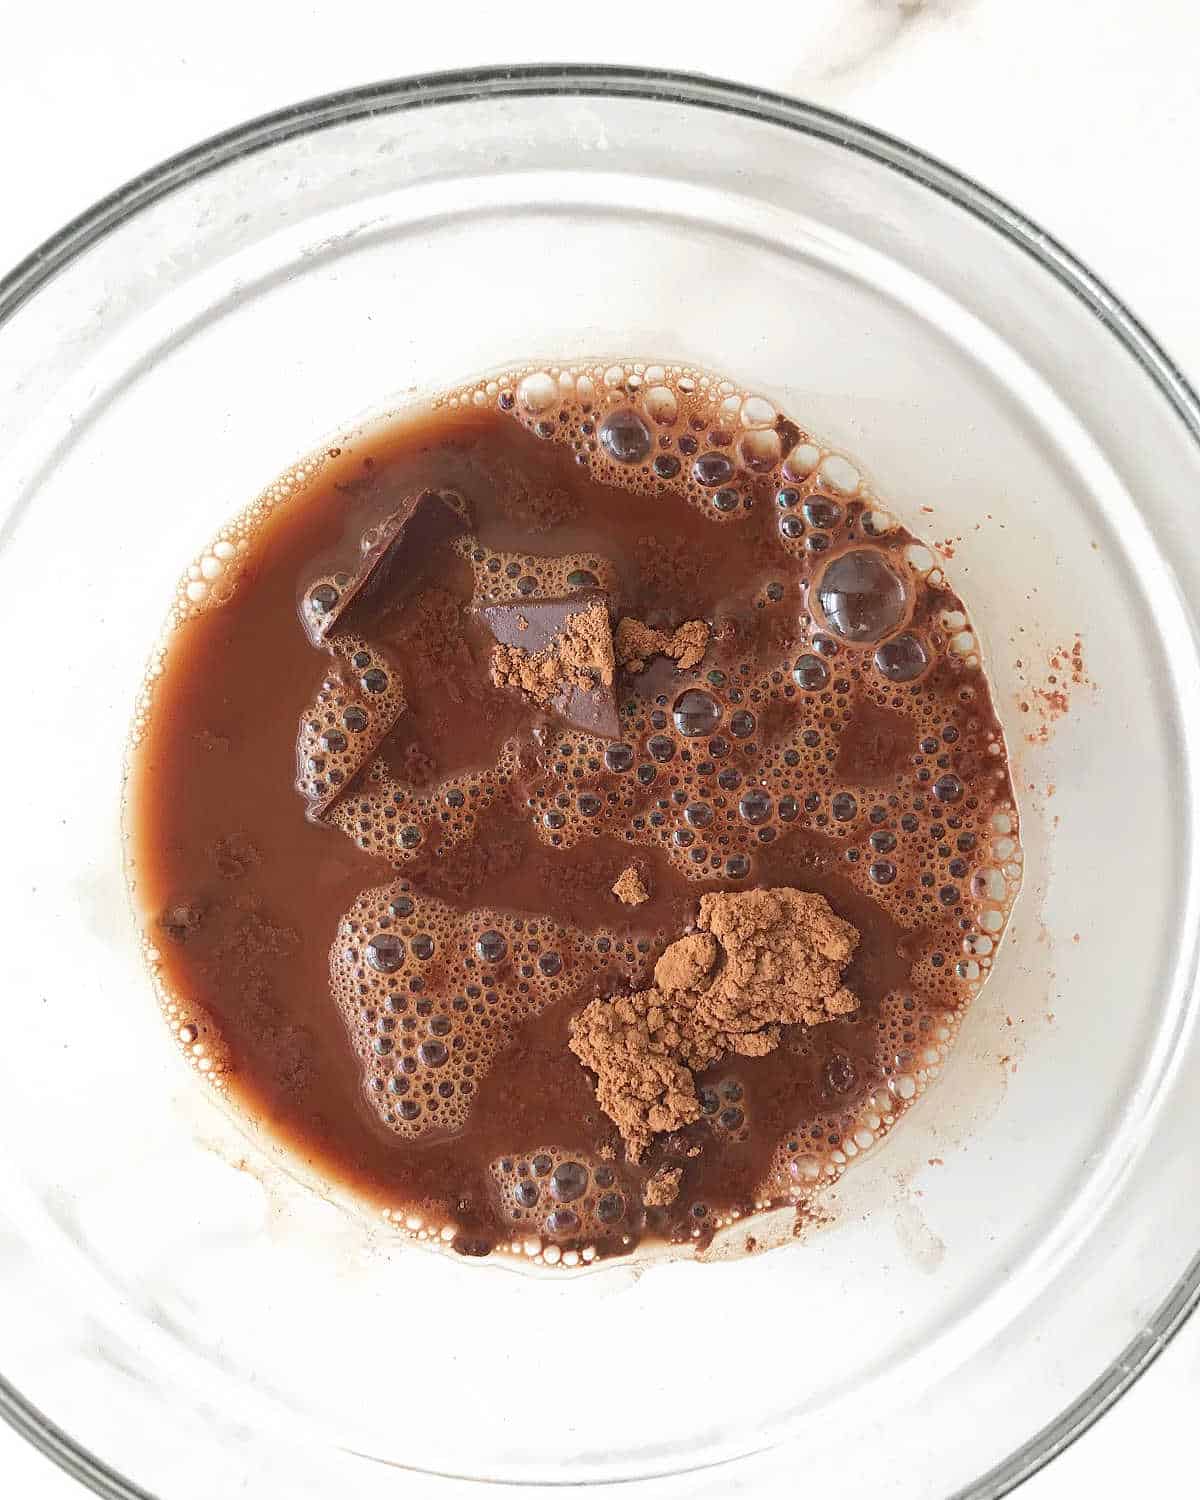 Cocoa powder, chocolate and coffee in a glass bowl on a white surface. 